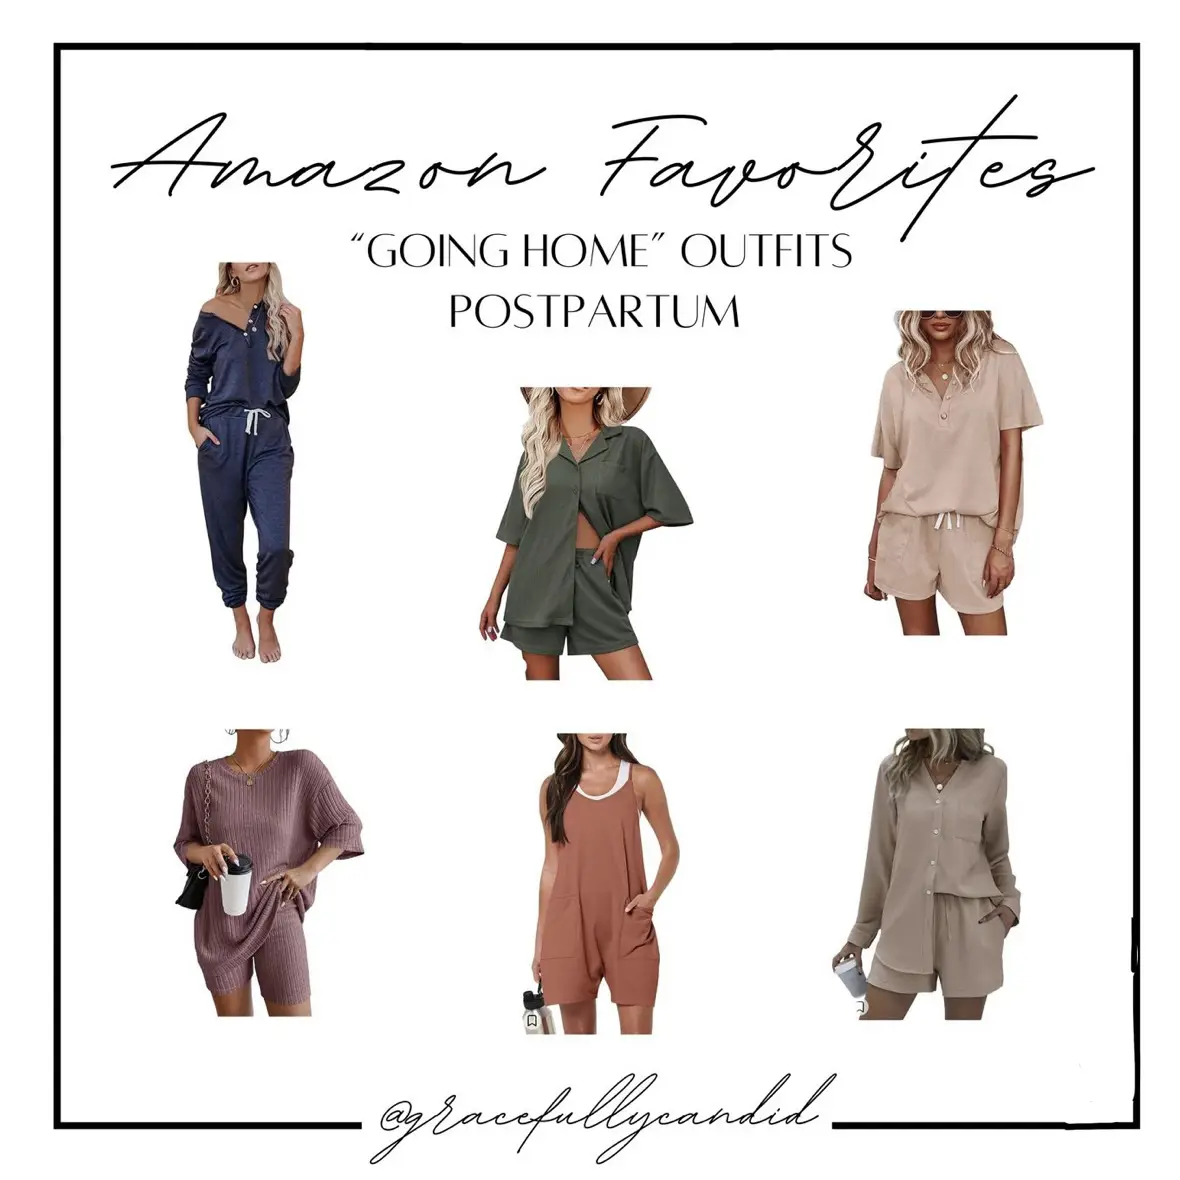 Going home”/ postpartum outfits, Gallery posted by grace